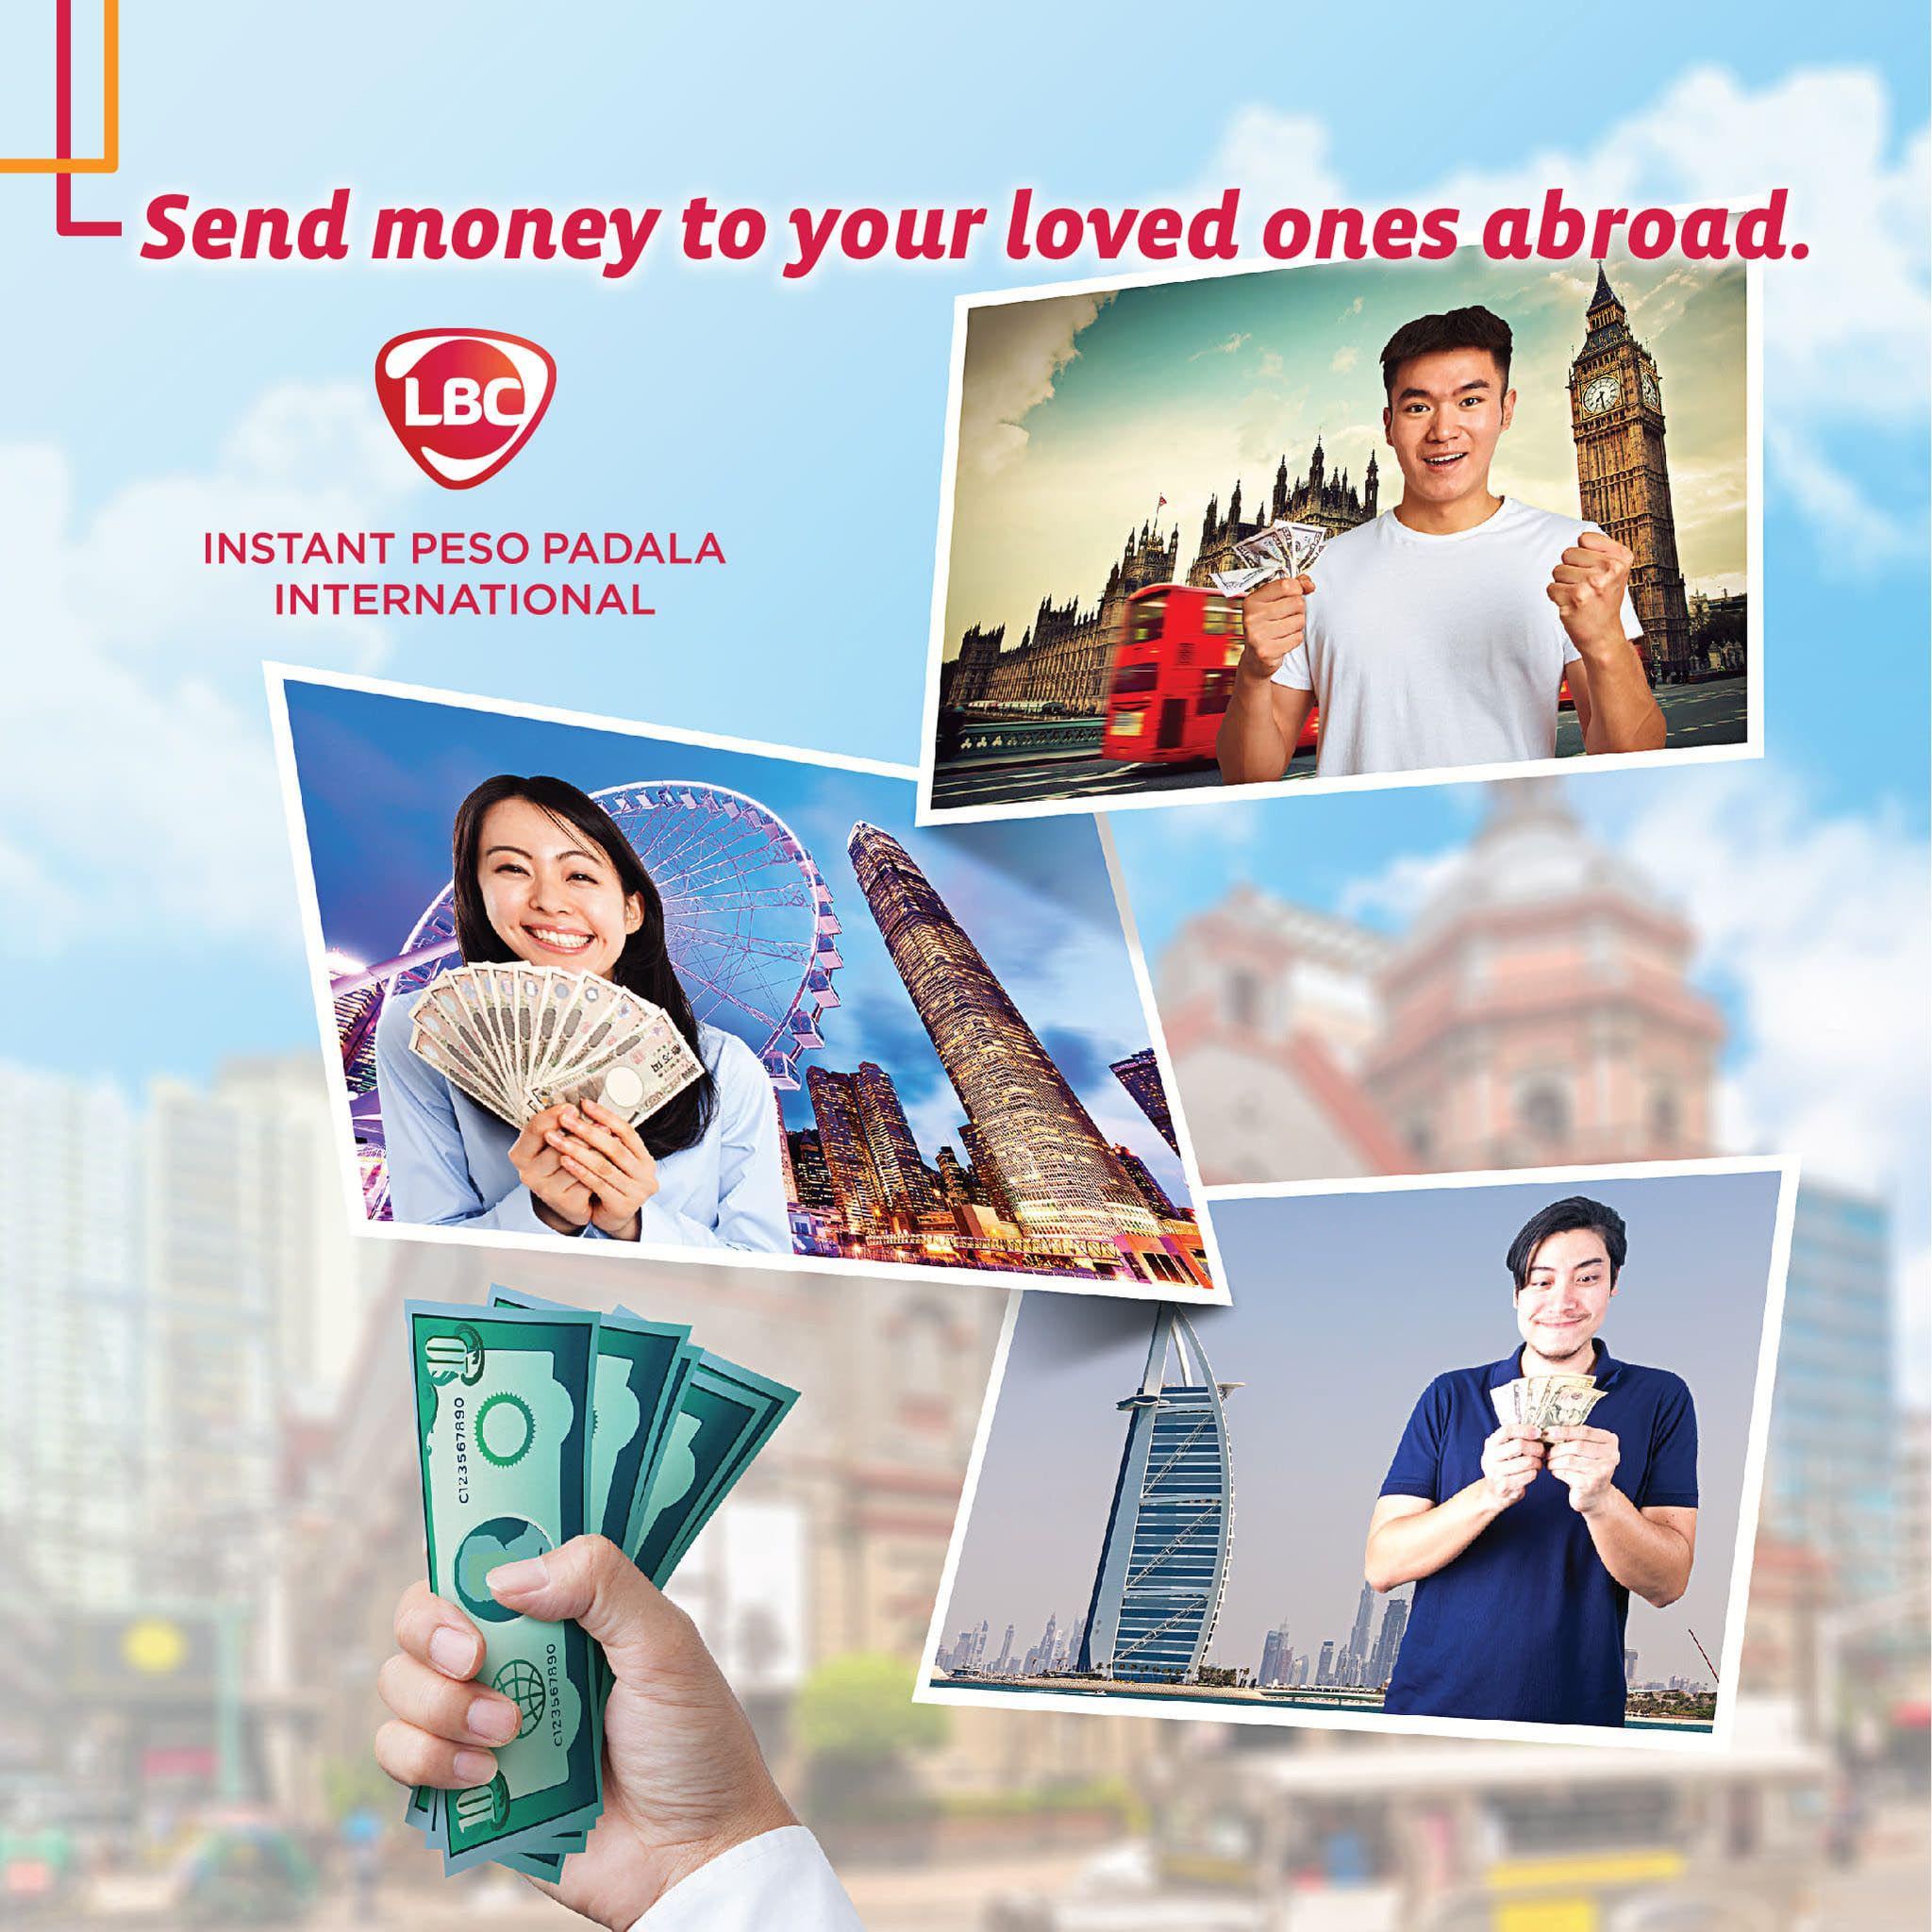 Sending Money Abroad is Now Simple, Safe and Swift with IPP International